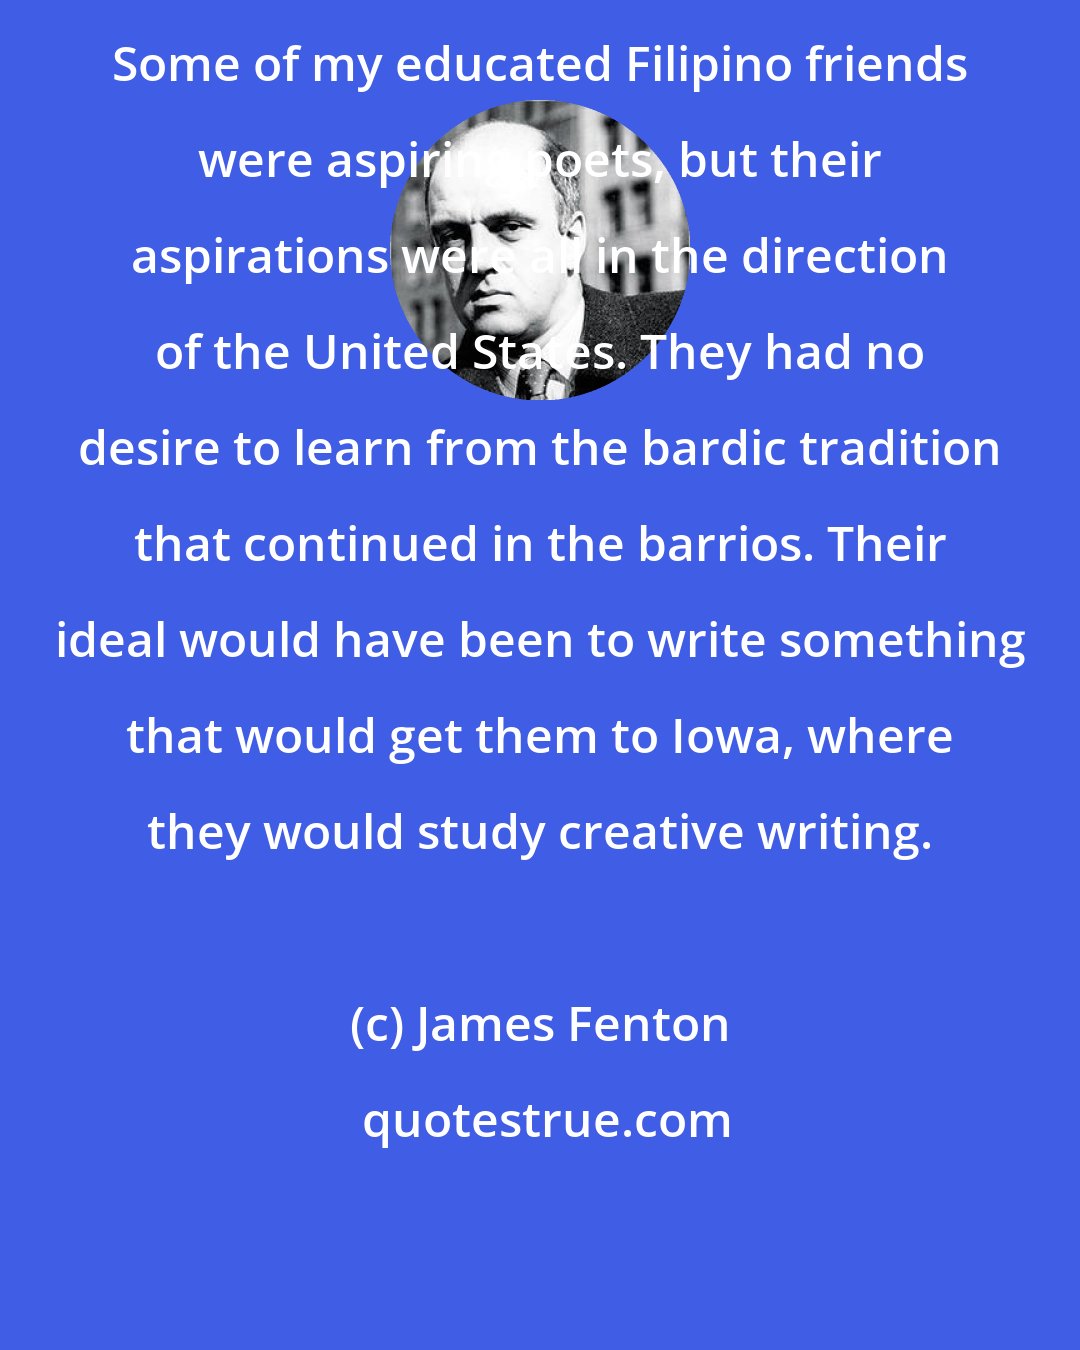 James Fenton: Some of my educated Filipino friends were aspiring poets, but their aspirations were all in the direction of the United States. They had no desire to learn from the bardic tradition that continued in the barrios. Their ideal would have been to write something that would get them to Iowa, where they would study creative writing.